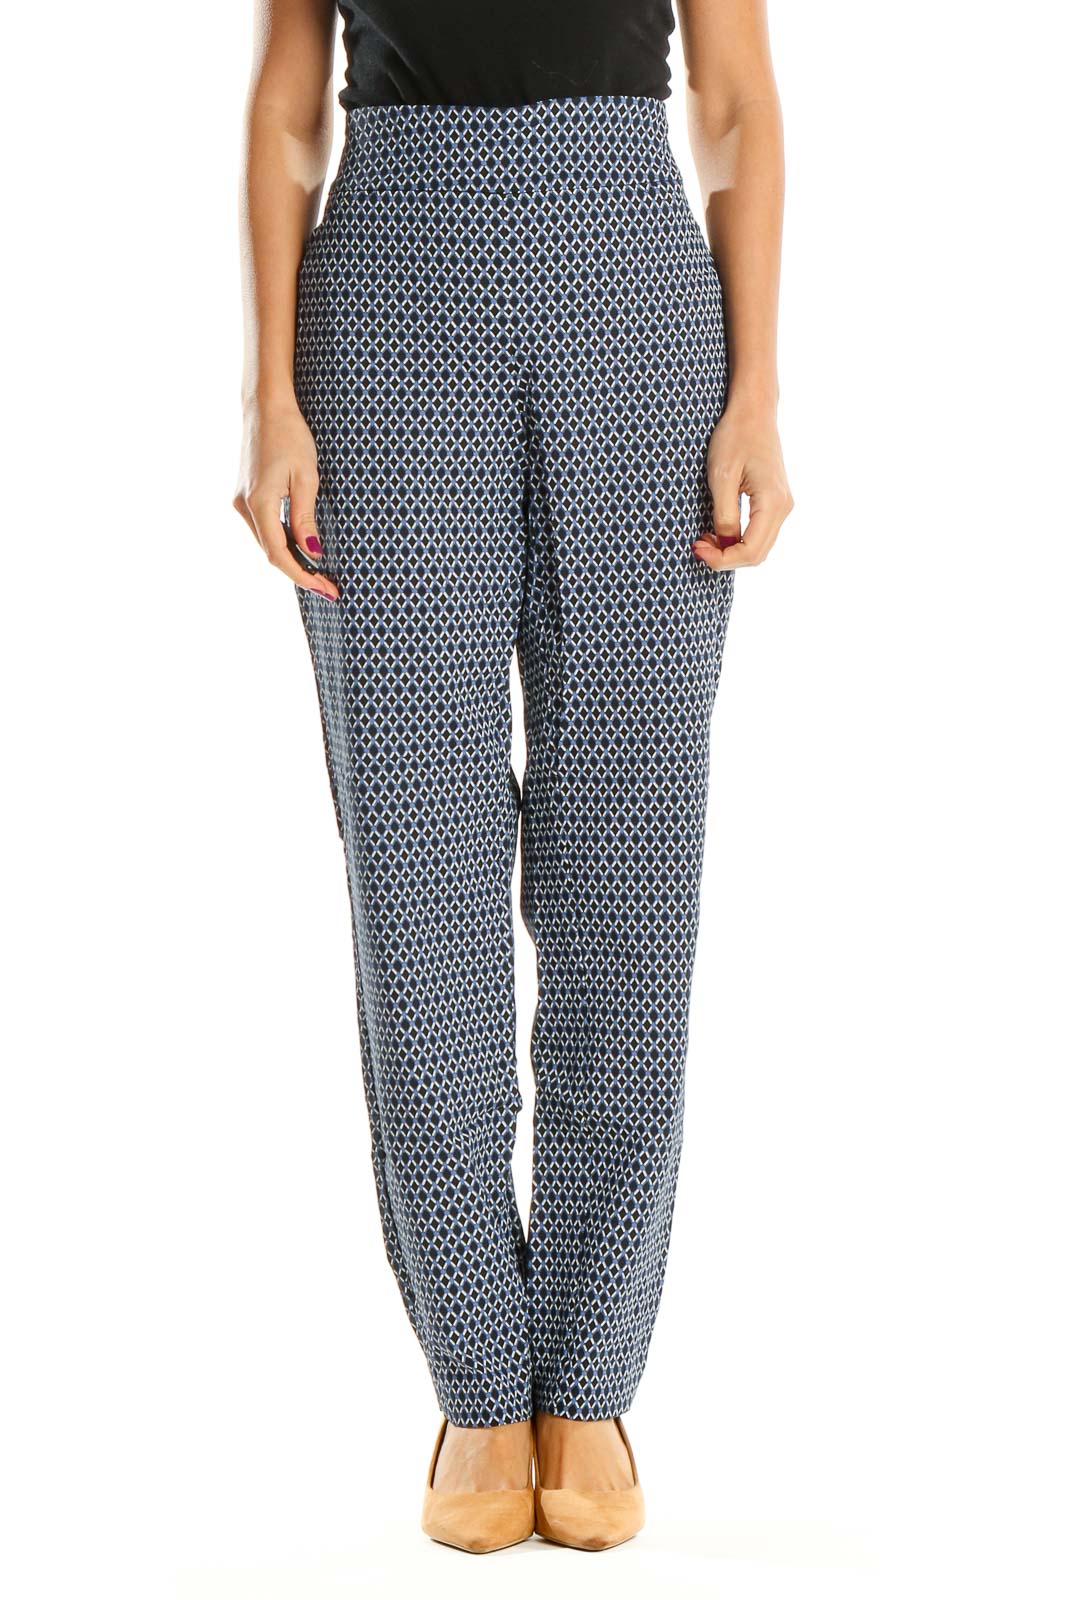 Blue Printed All Day Wear Trousers Front